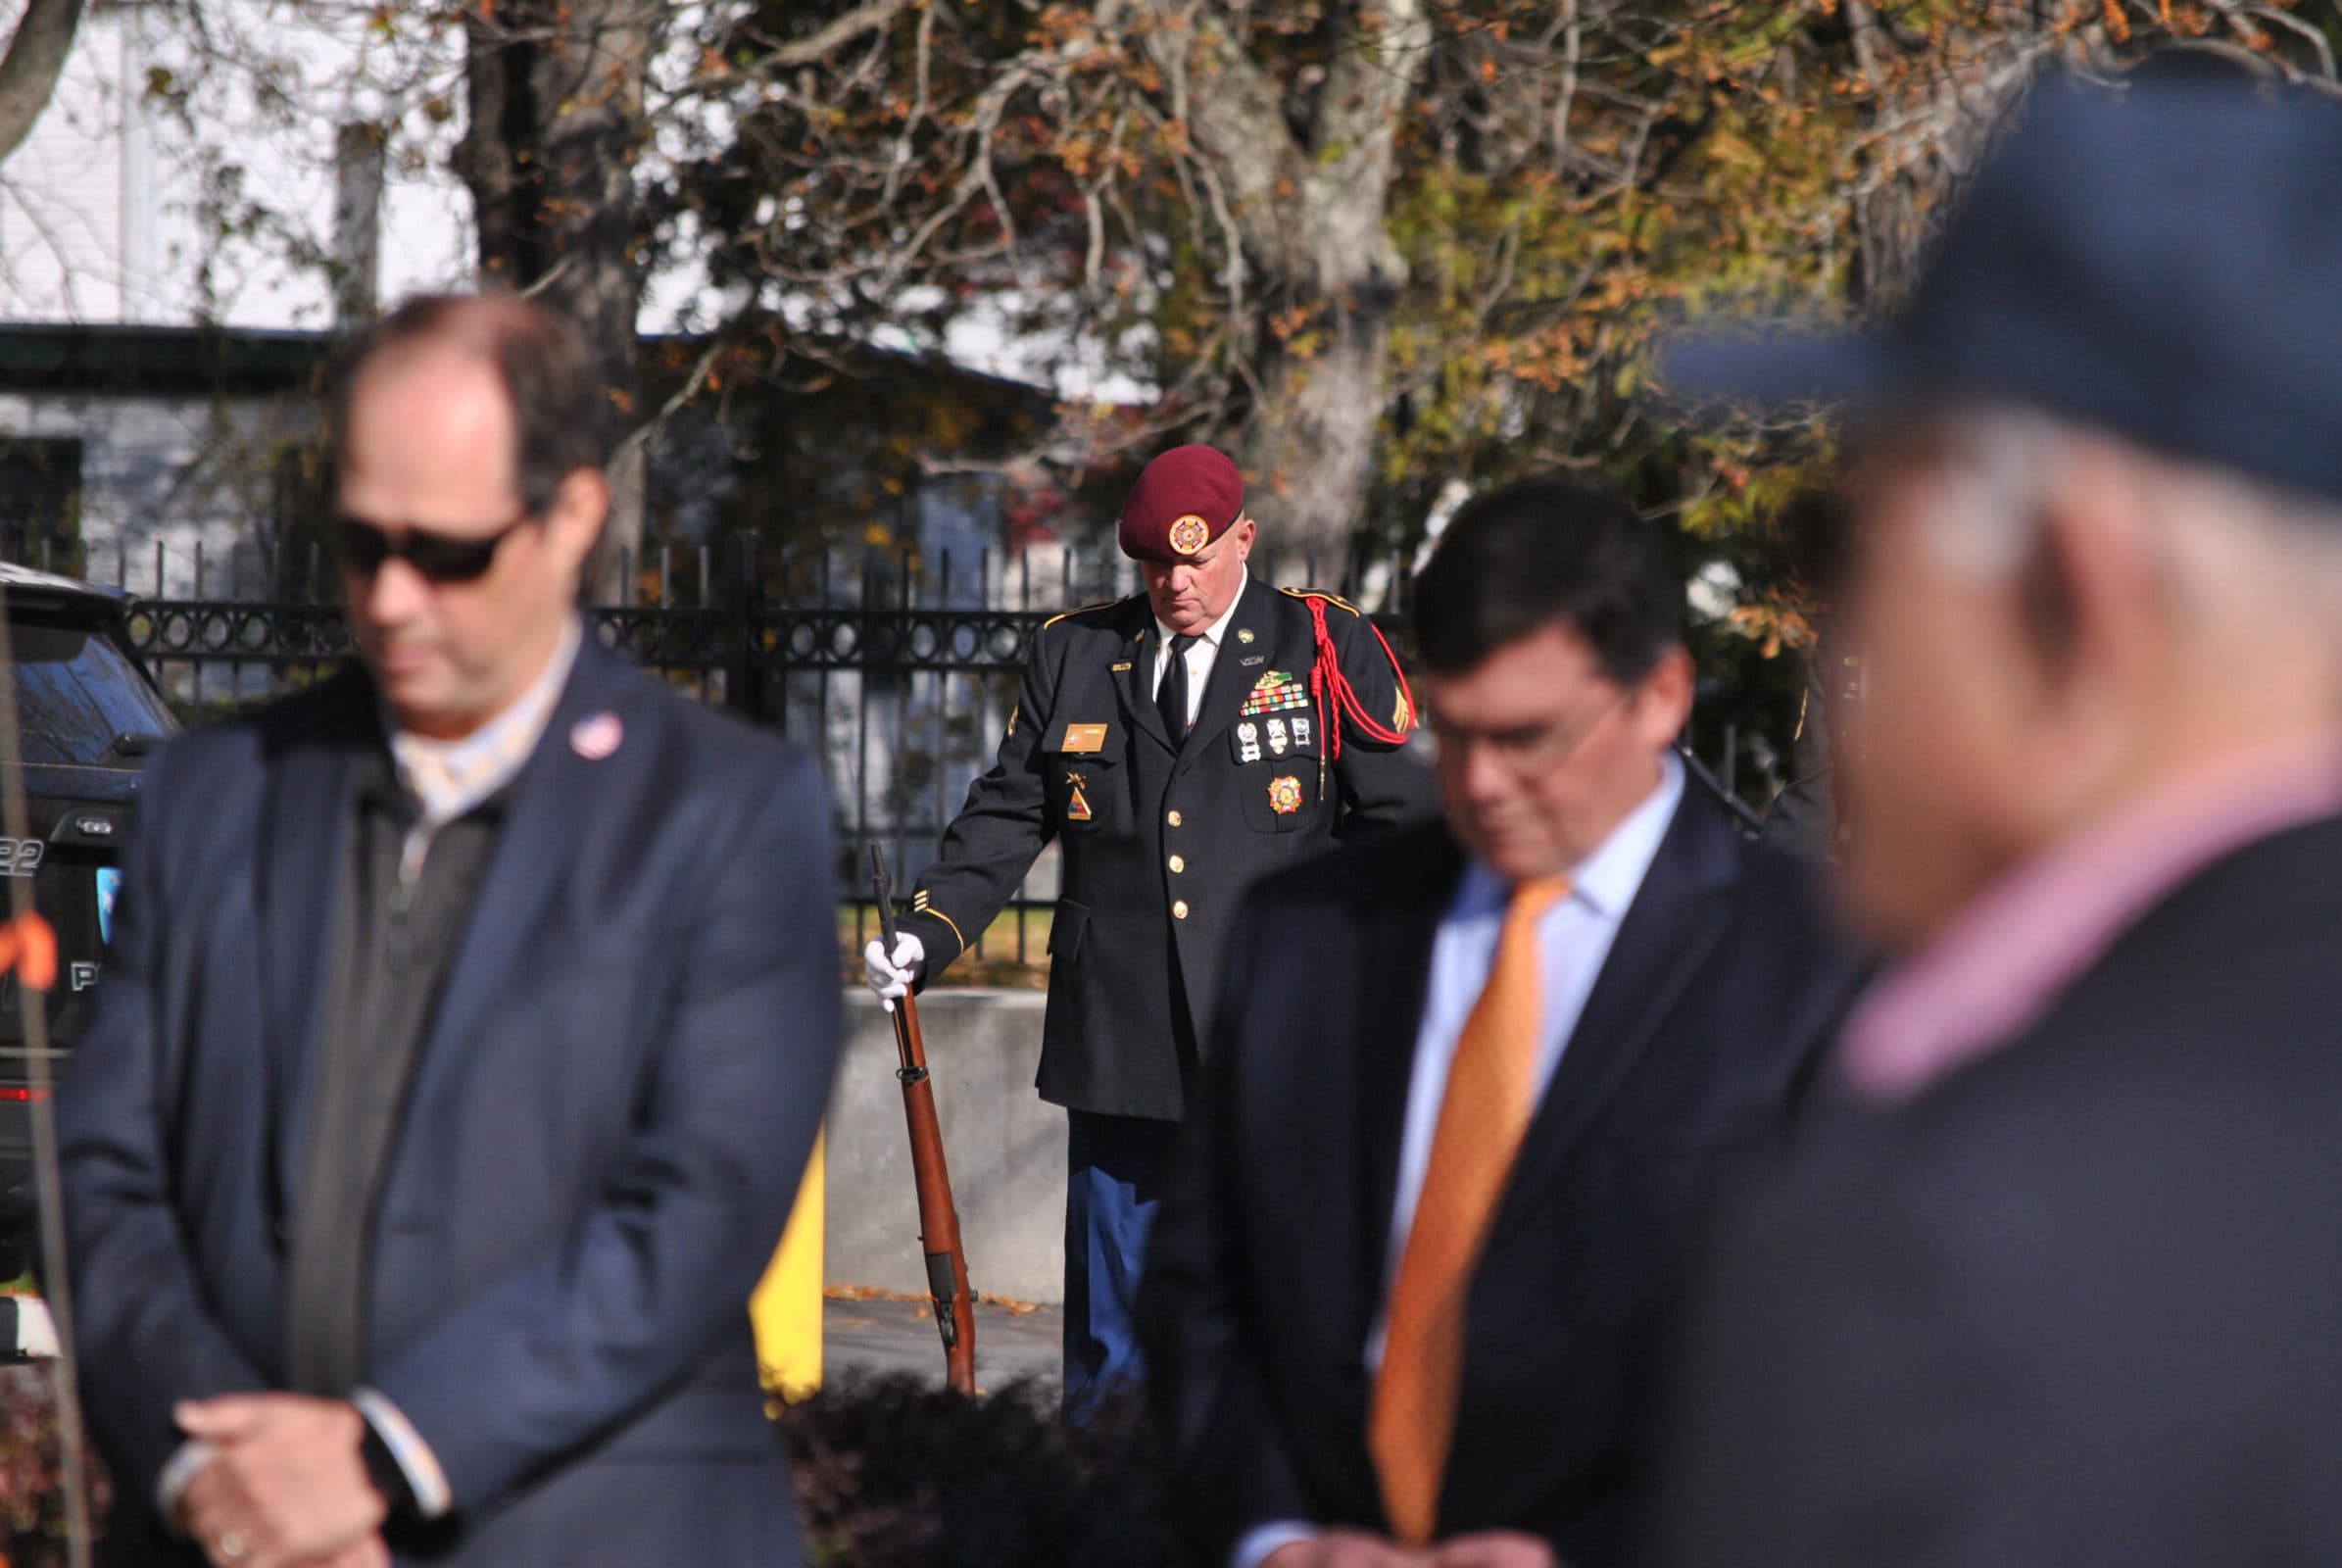 Westborough holds Veterans Day observances